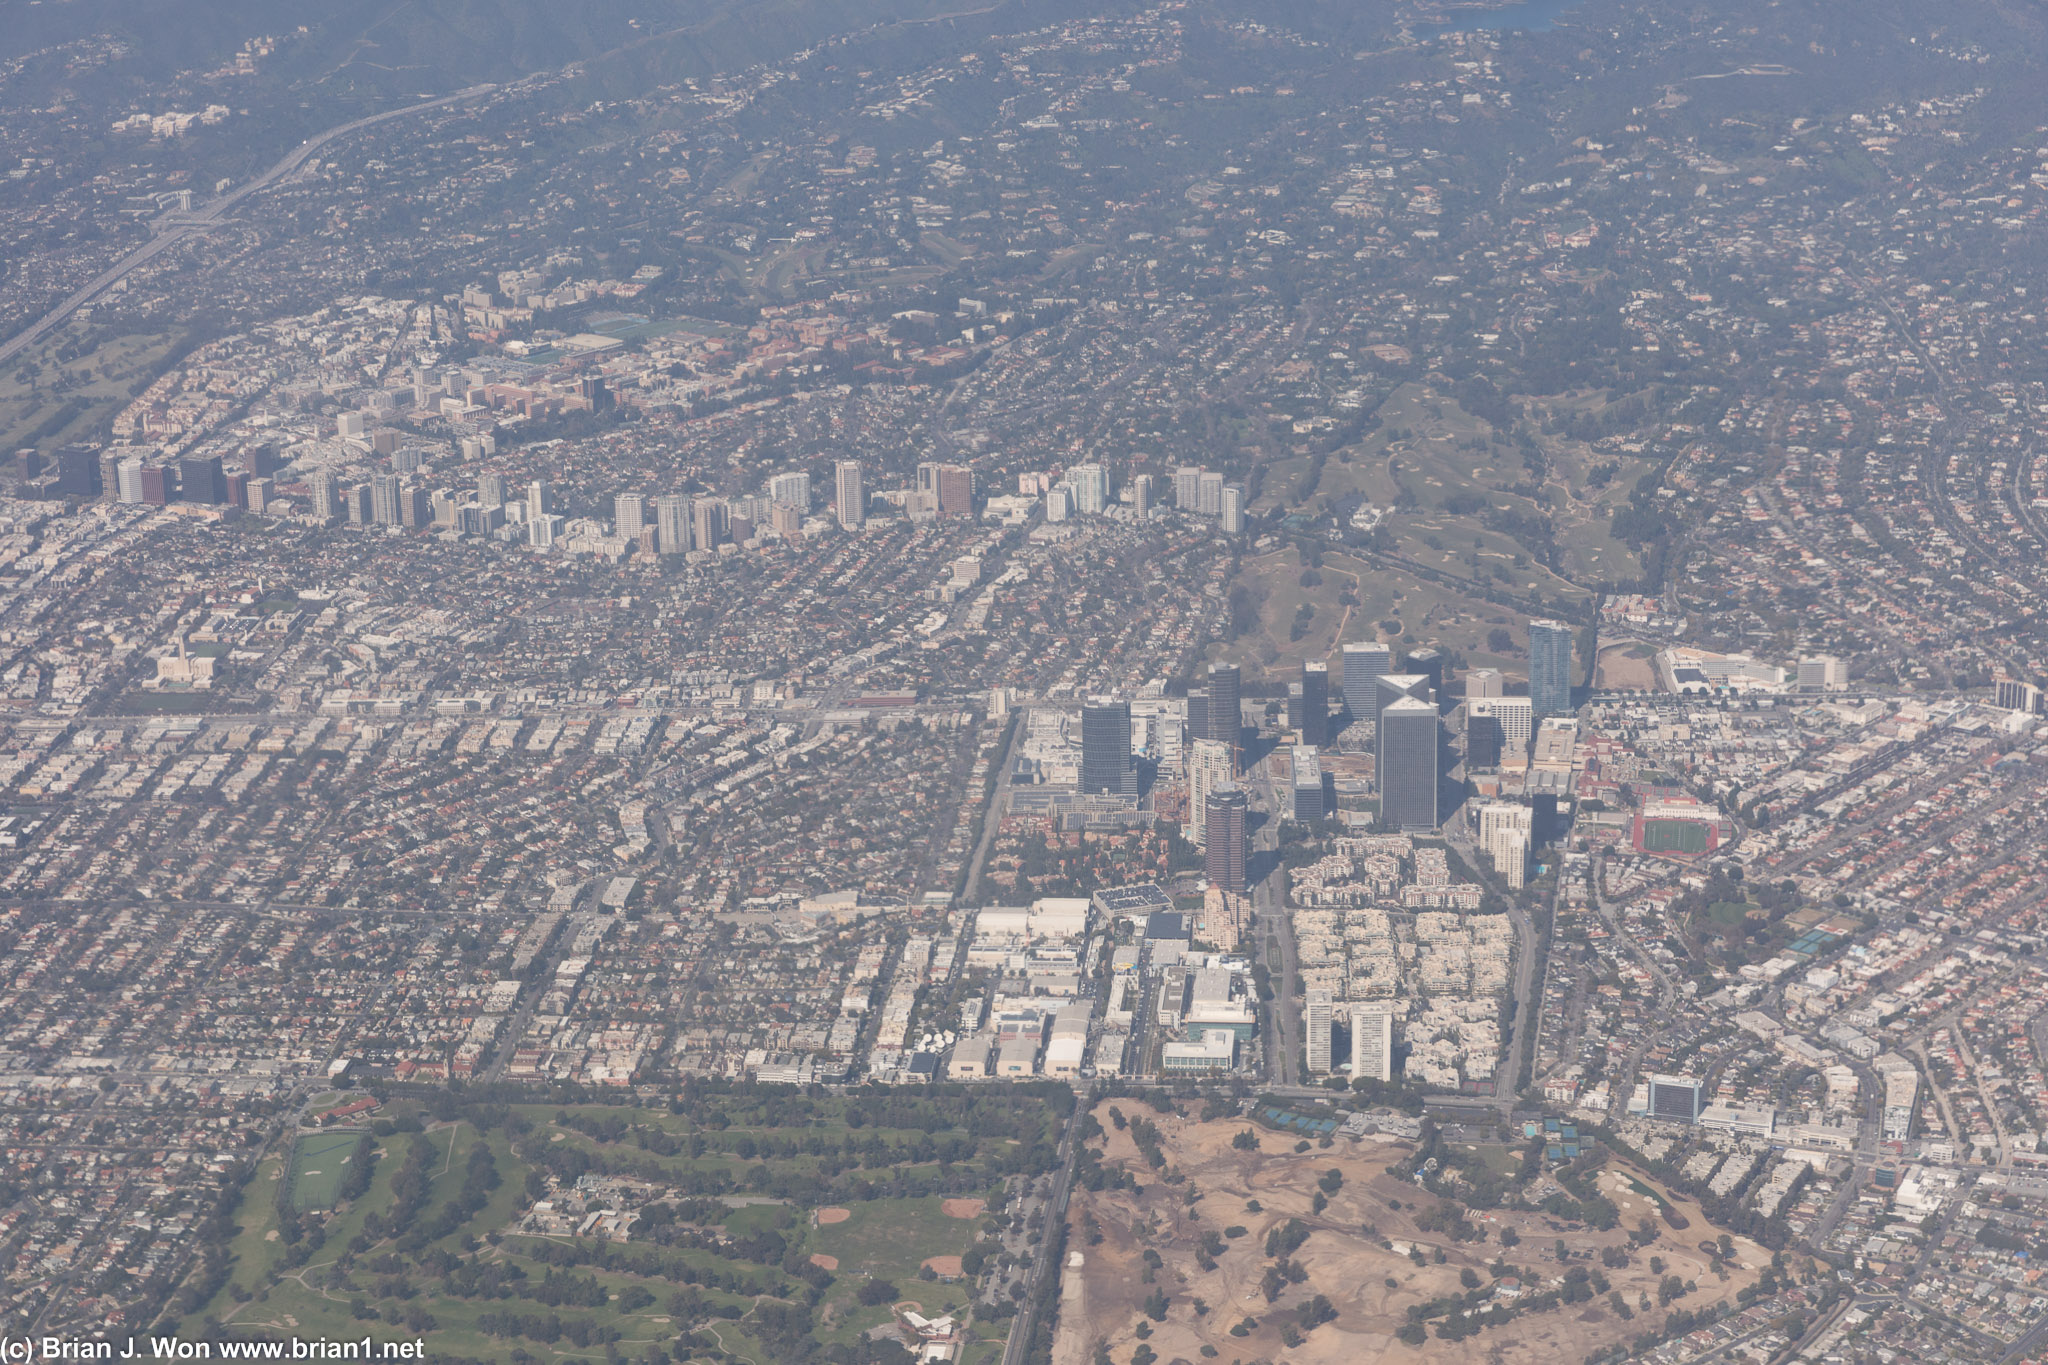 UCLA to the left, Century City to the right.